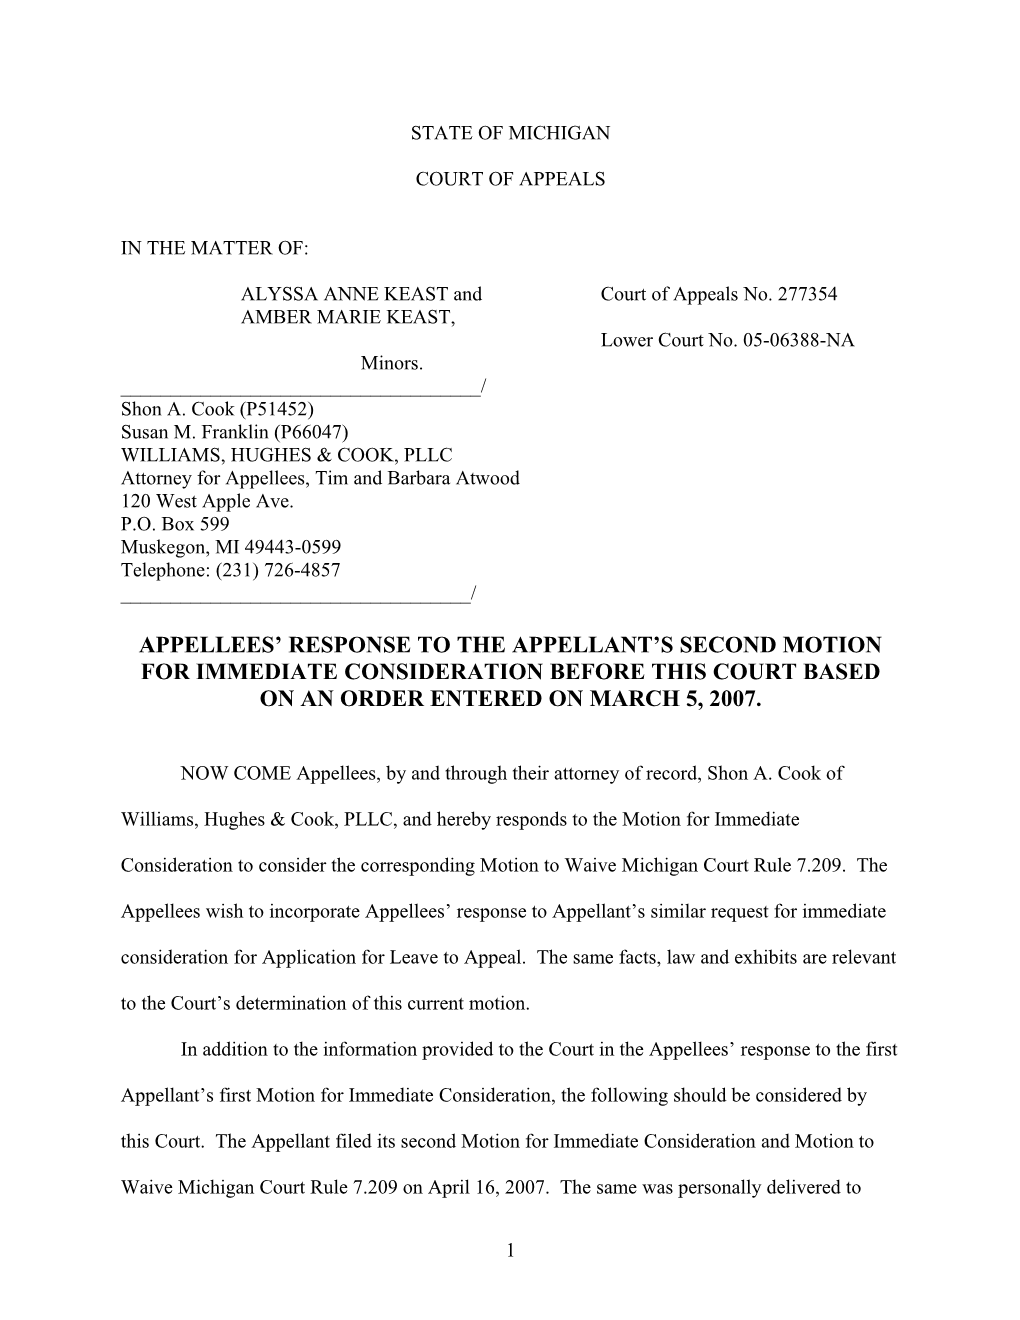 Appellees Response to the Appellant S Second Motion for Immediate Consideration Before